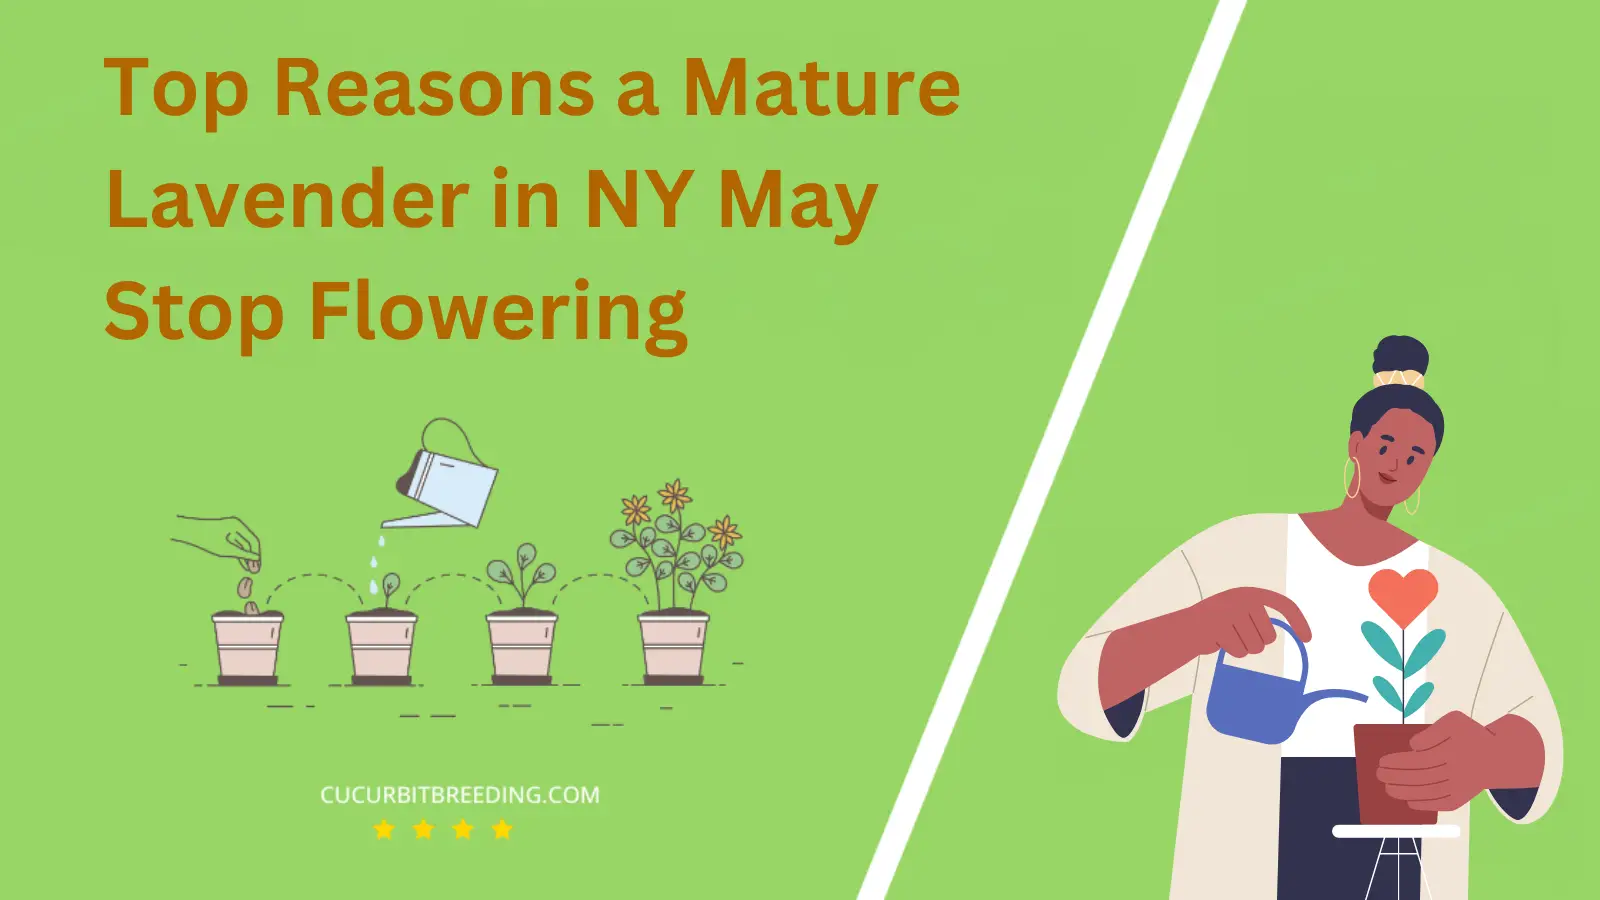 Top Reasons a Mature Lavender in NY May Stop Flowering